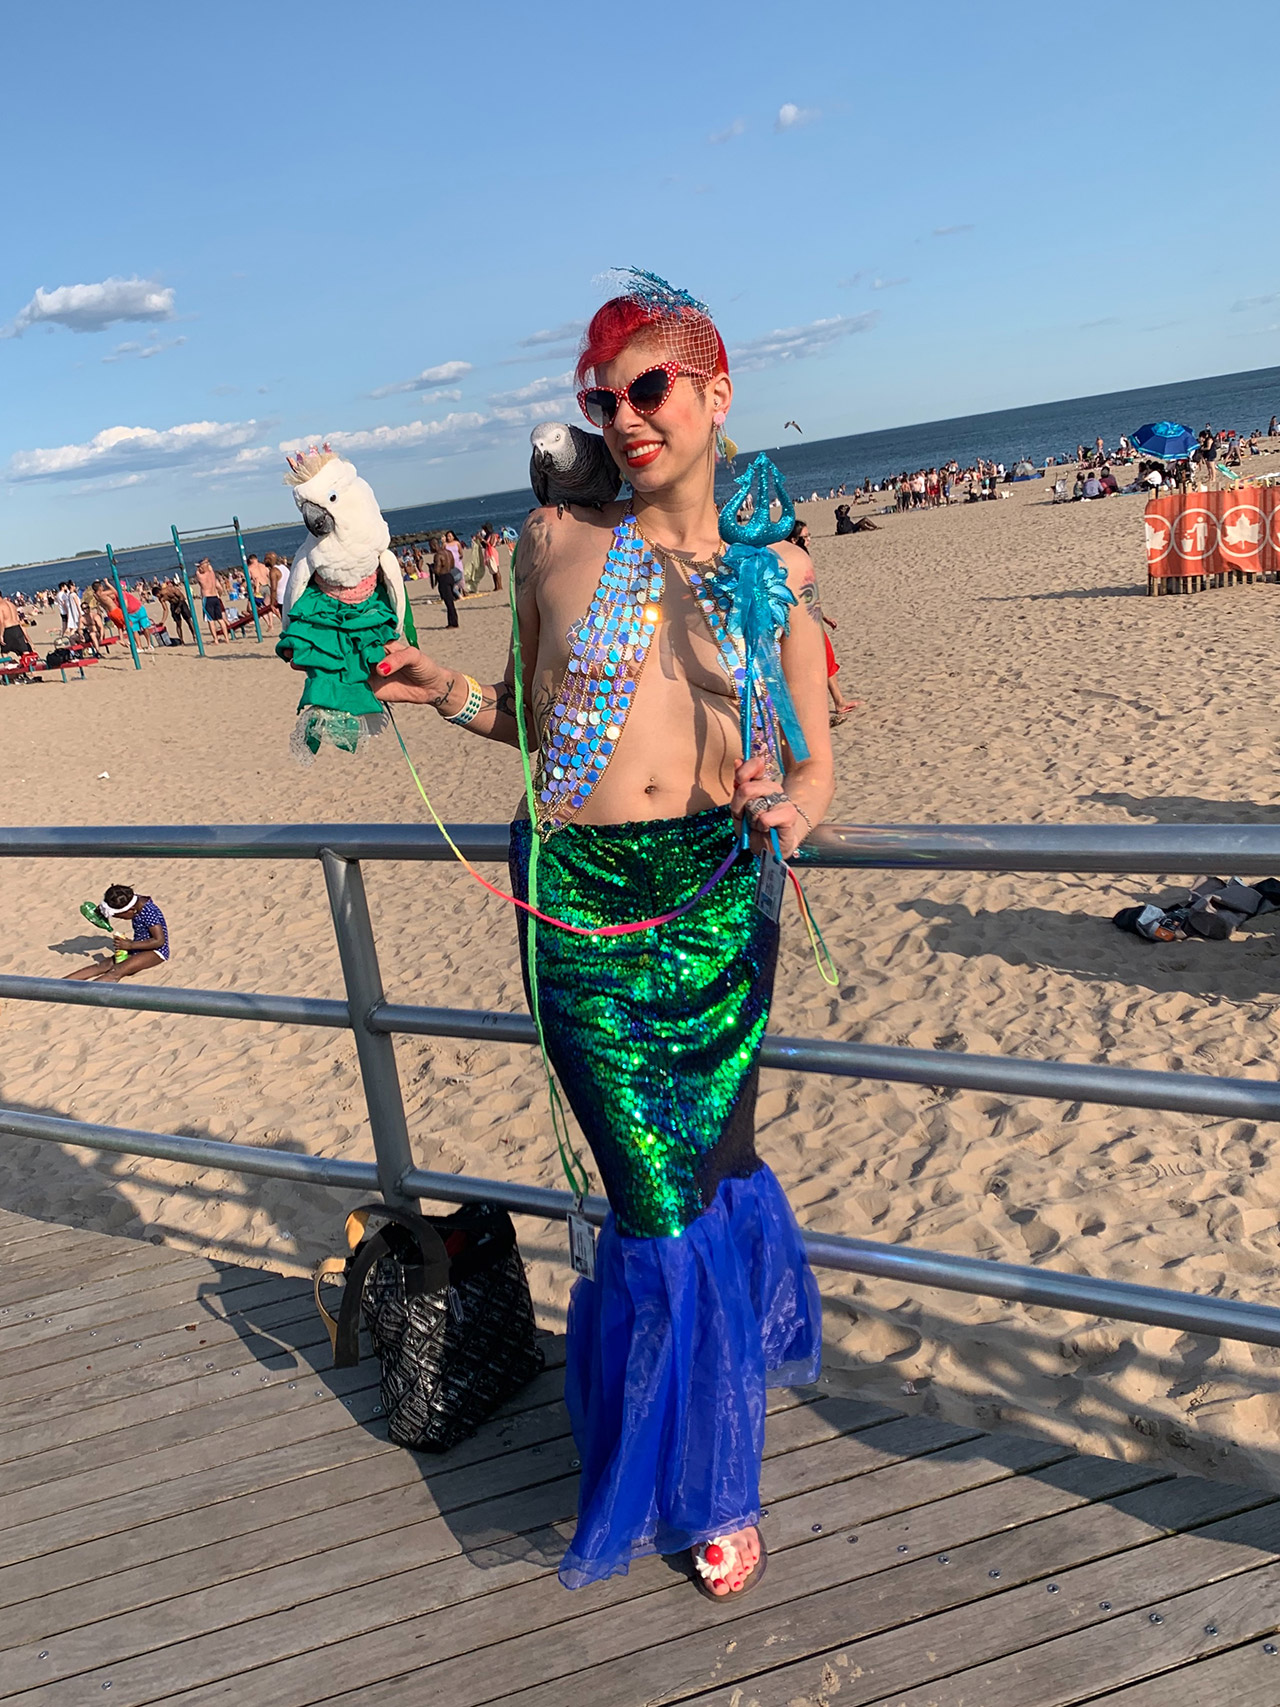 This photo was taken this June 2019 at the Coney Island boardwalk when we went to the Mermaid Parade! We love taking lots of fun day trips together as a family during the summer whenever we can!